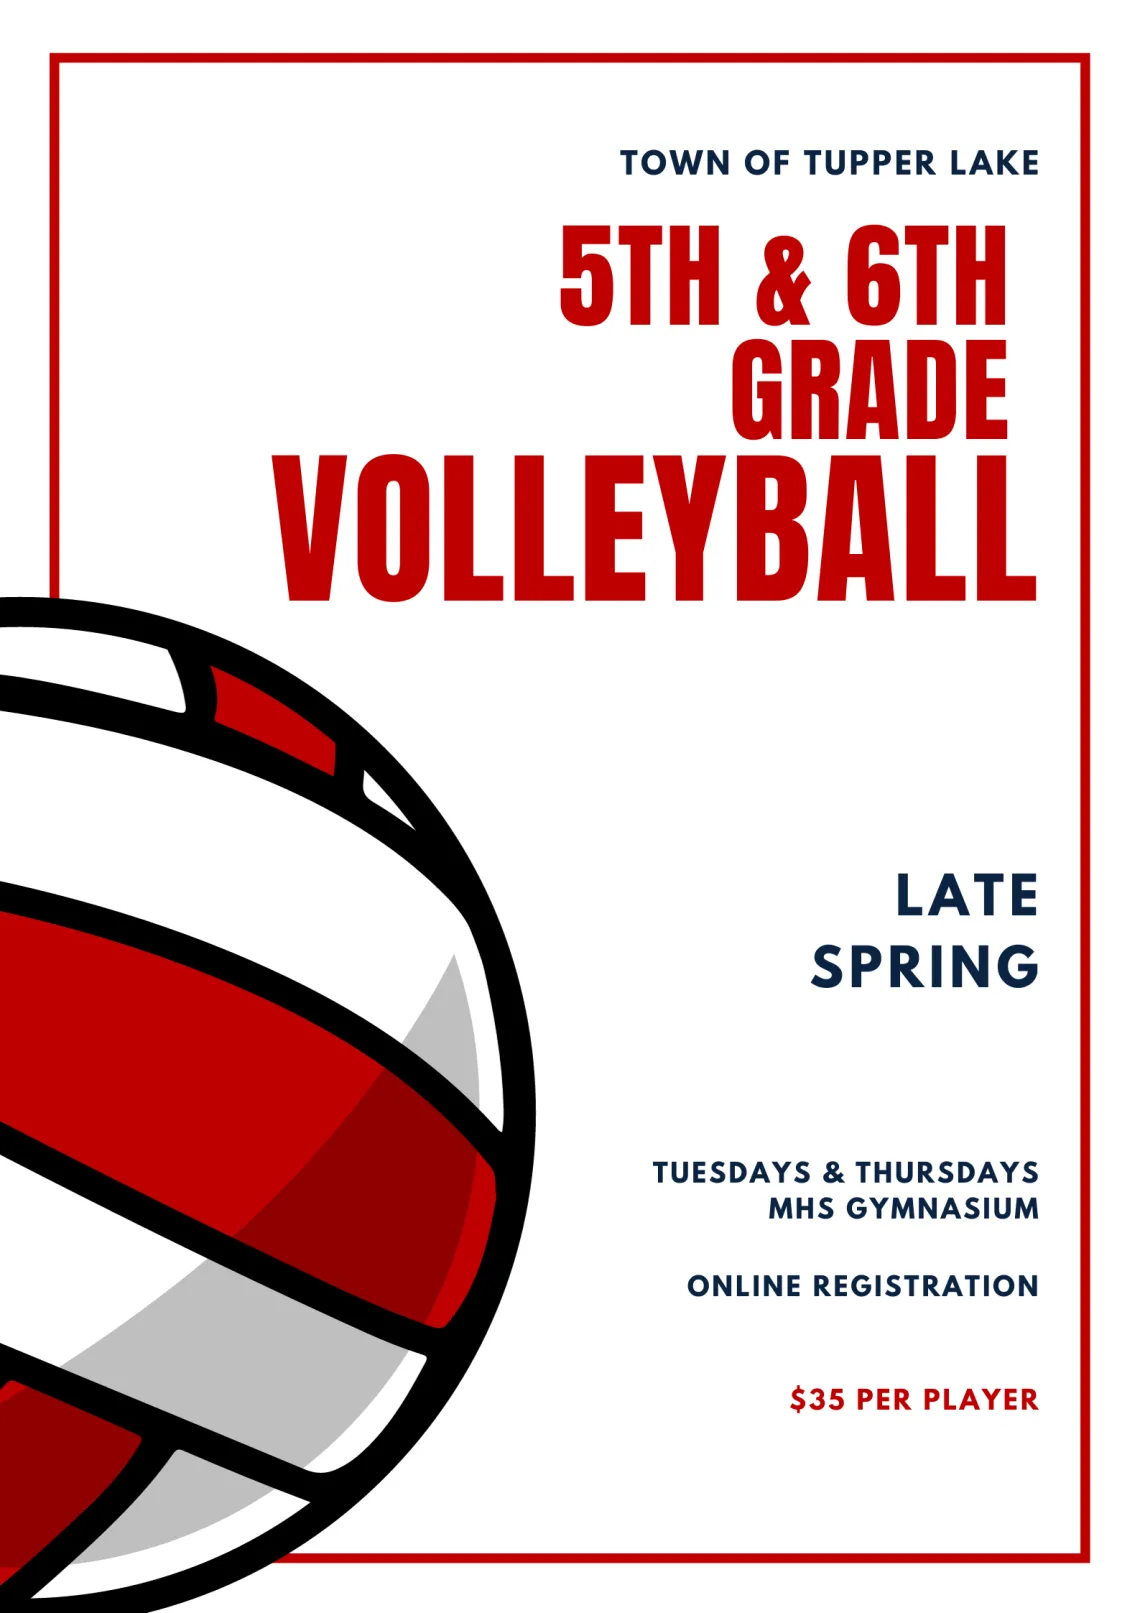 An illustrated flyer promoting a youth volleyball program for 5th and 6th graders in Tupper Lake.